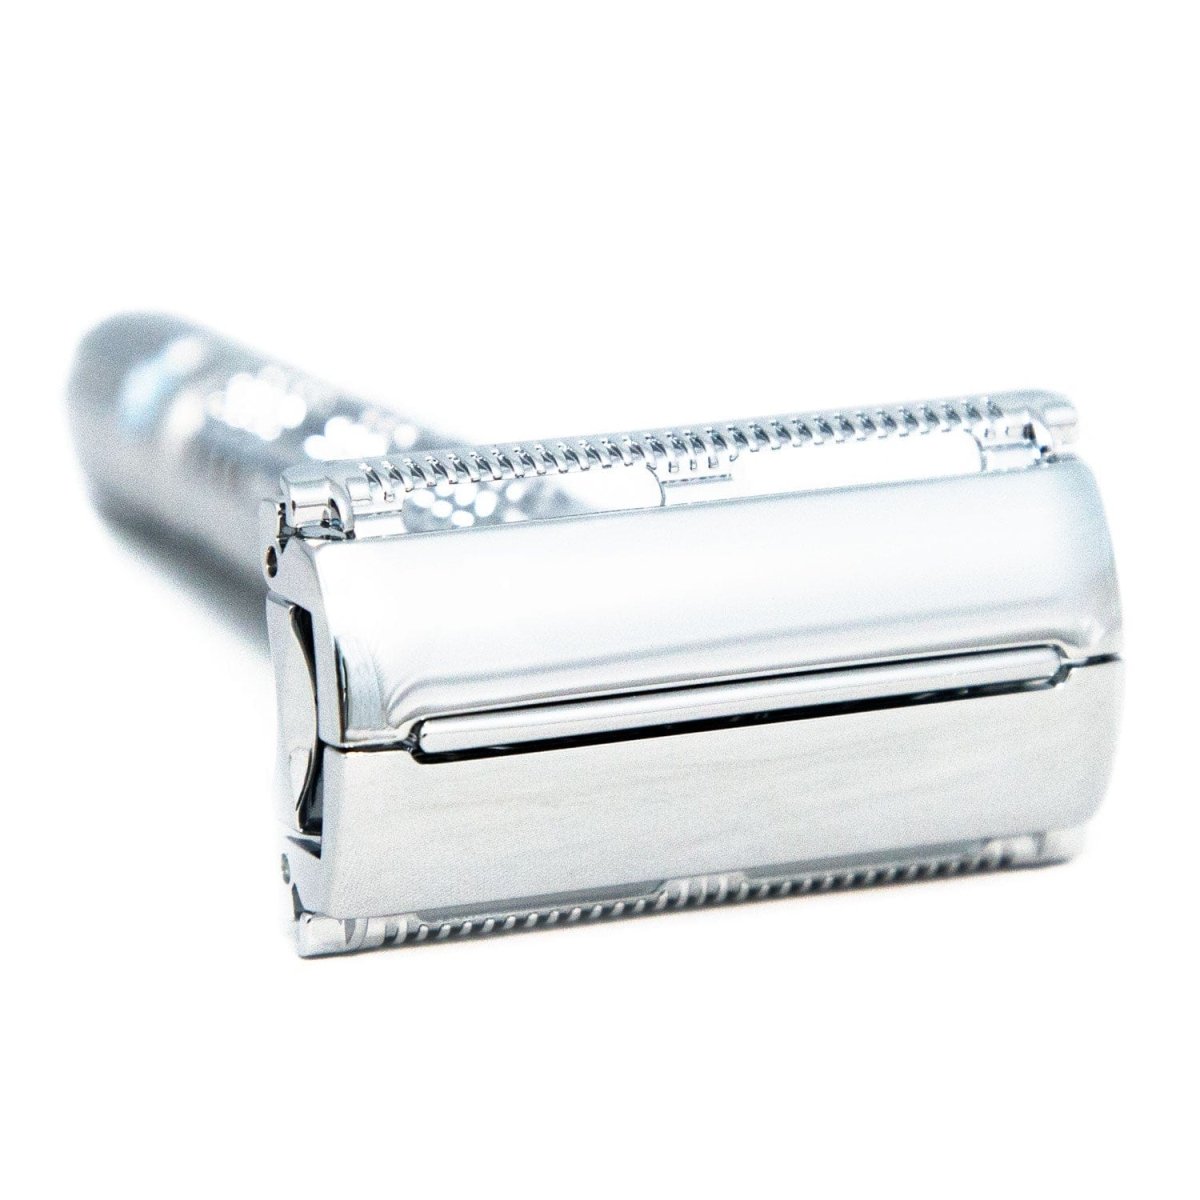 Hill & Drew HDRB40 Double Edge Butterfly Razor and Case - Shaving Time